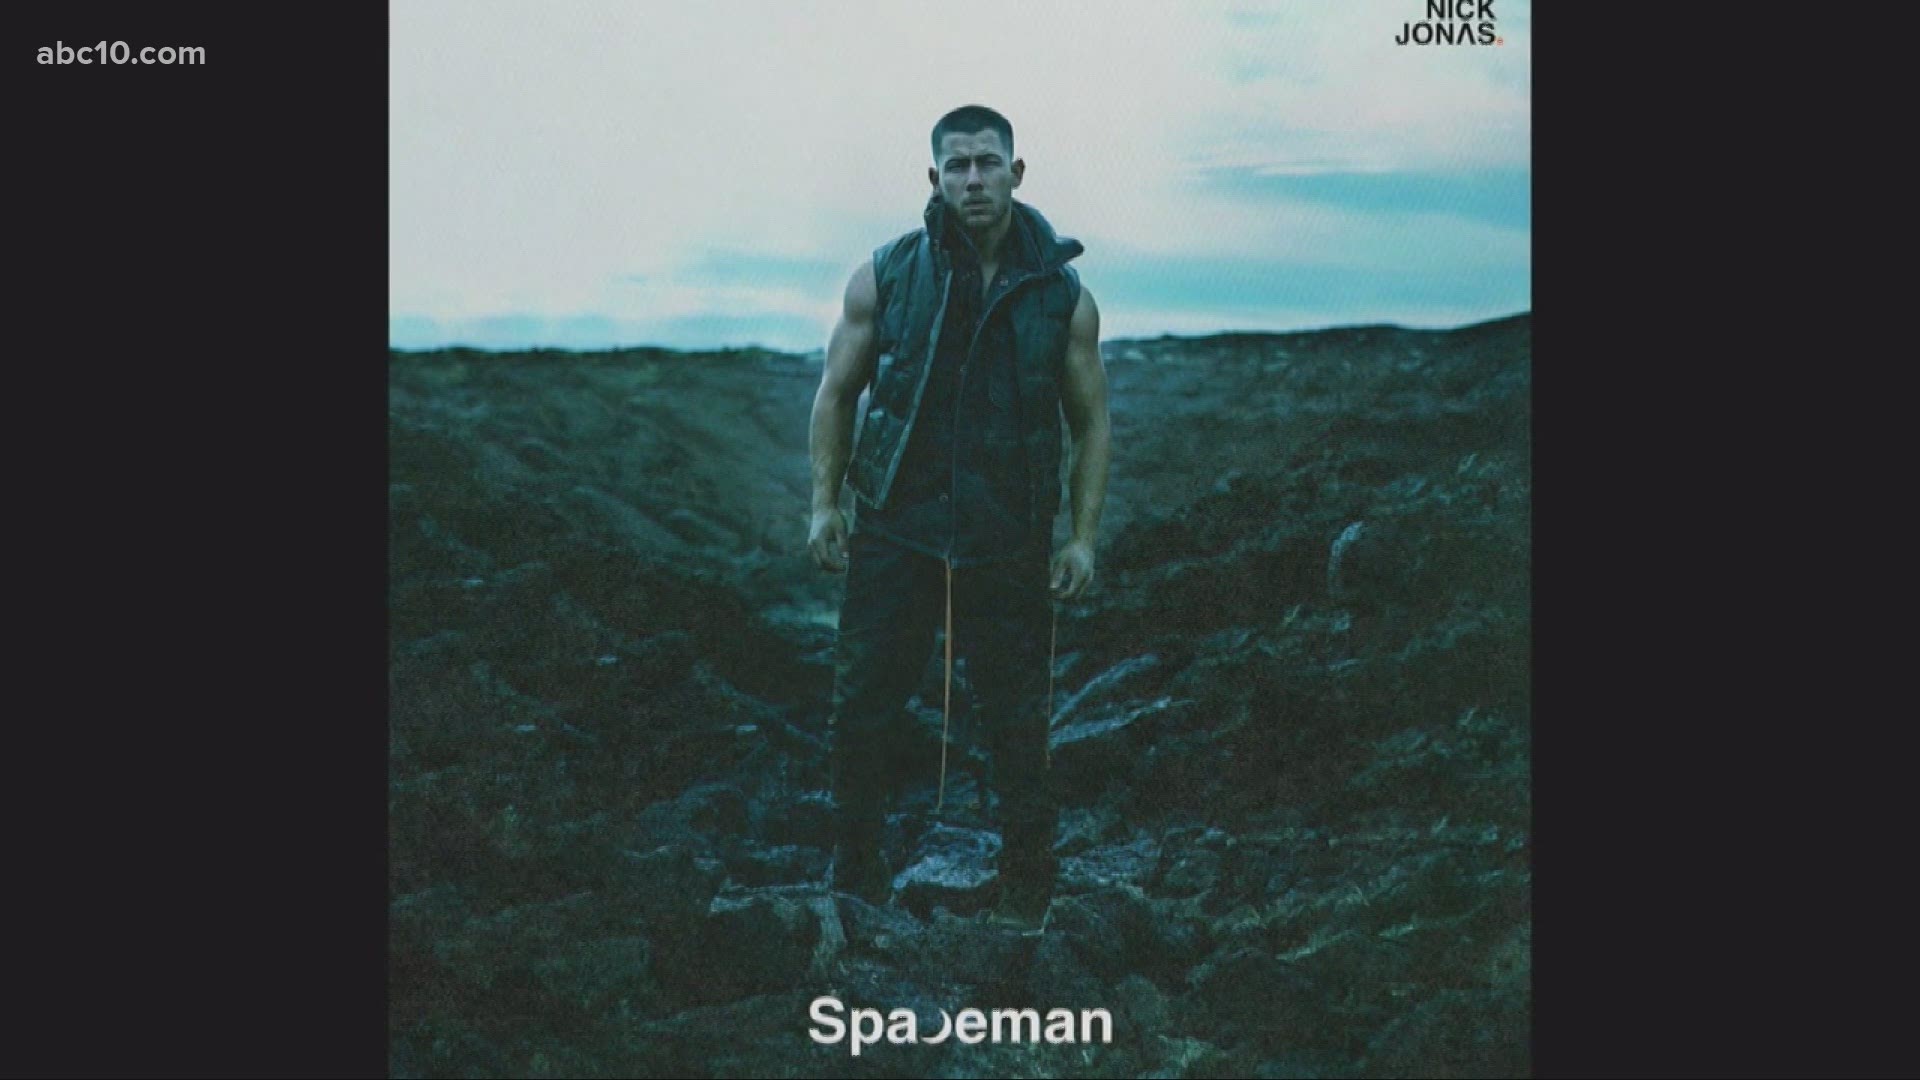 Nick Jonas will appear on 'SNL' and is said to be performing his new single, 'Spaceman.'